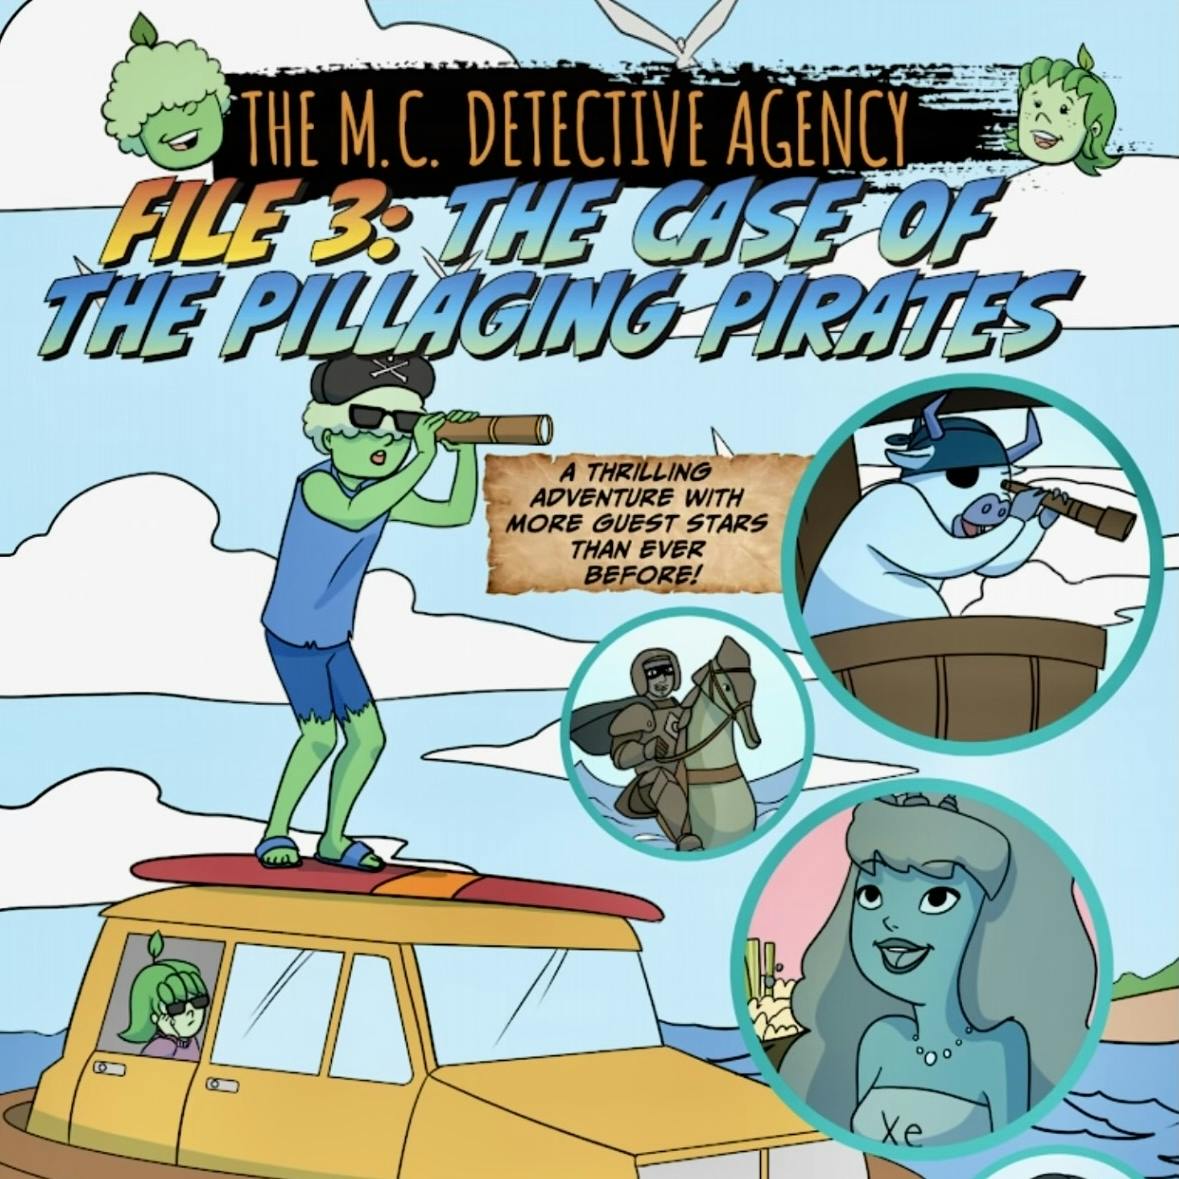 M.C. Detective Agency - Chapter 6 - Time Raiders